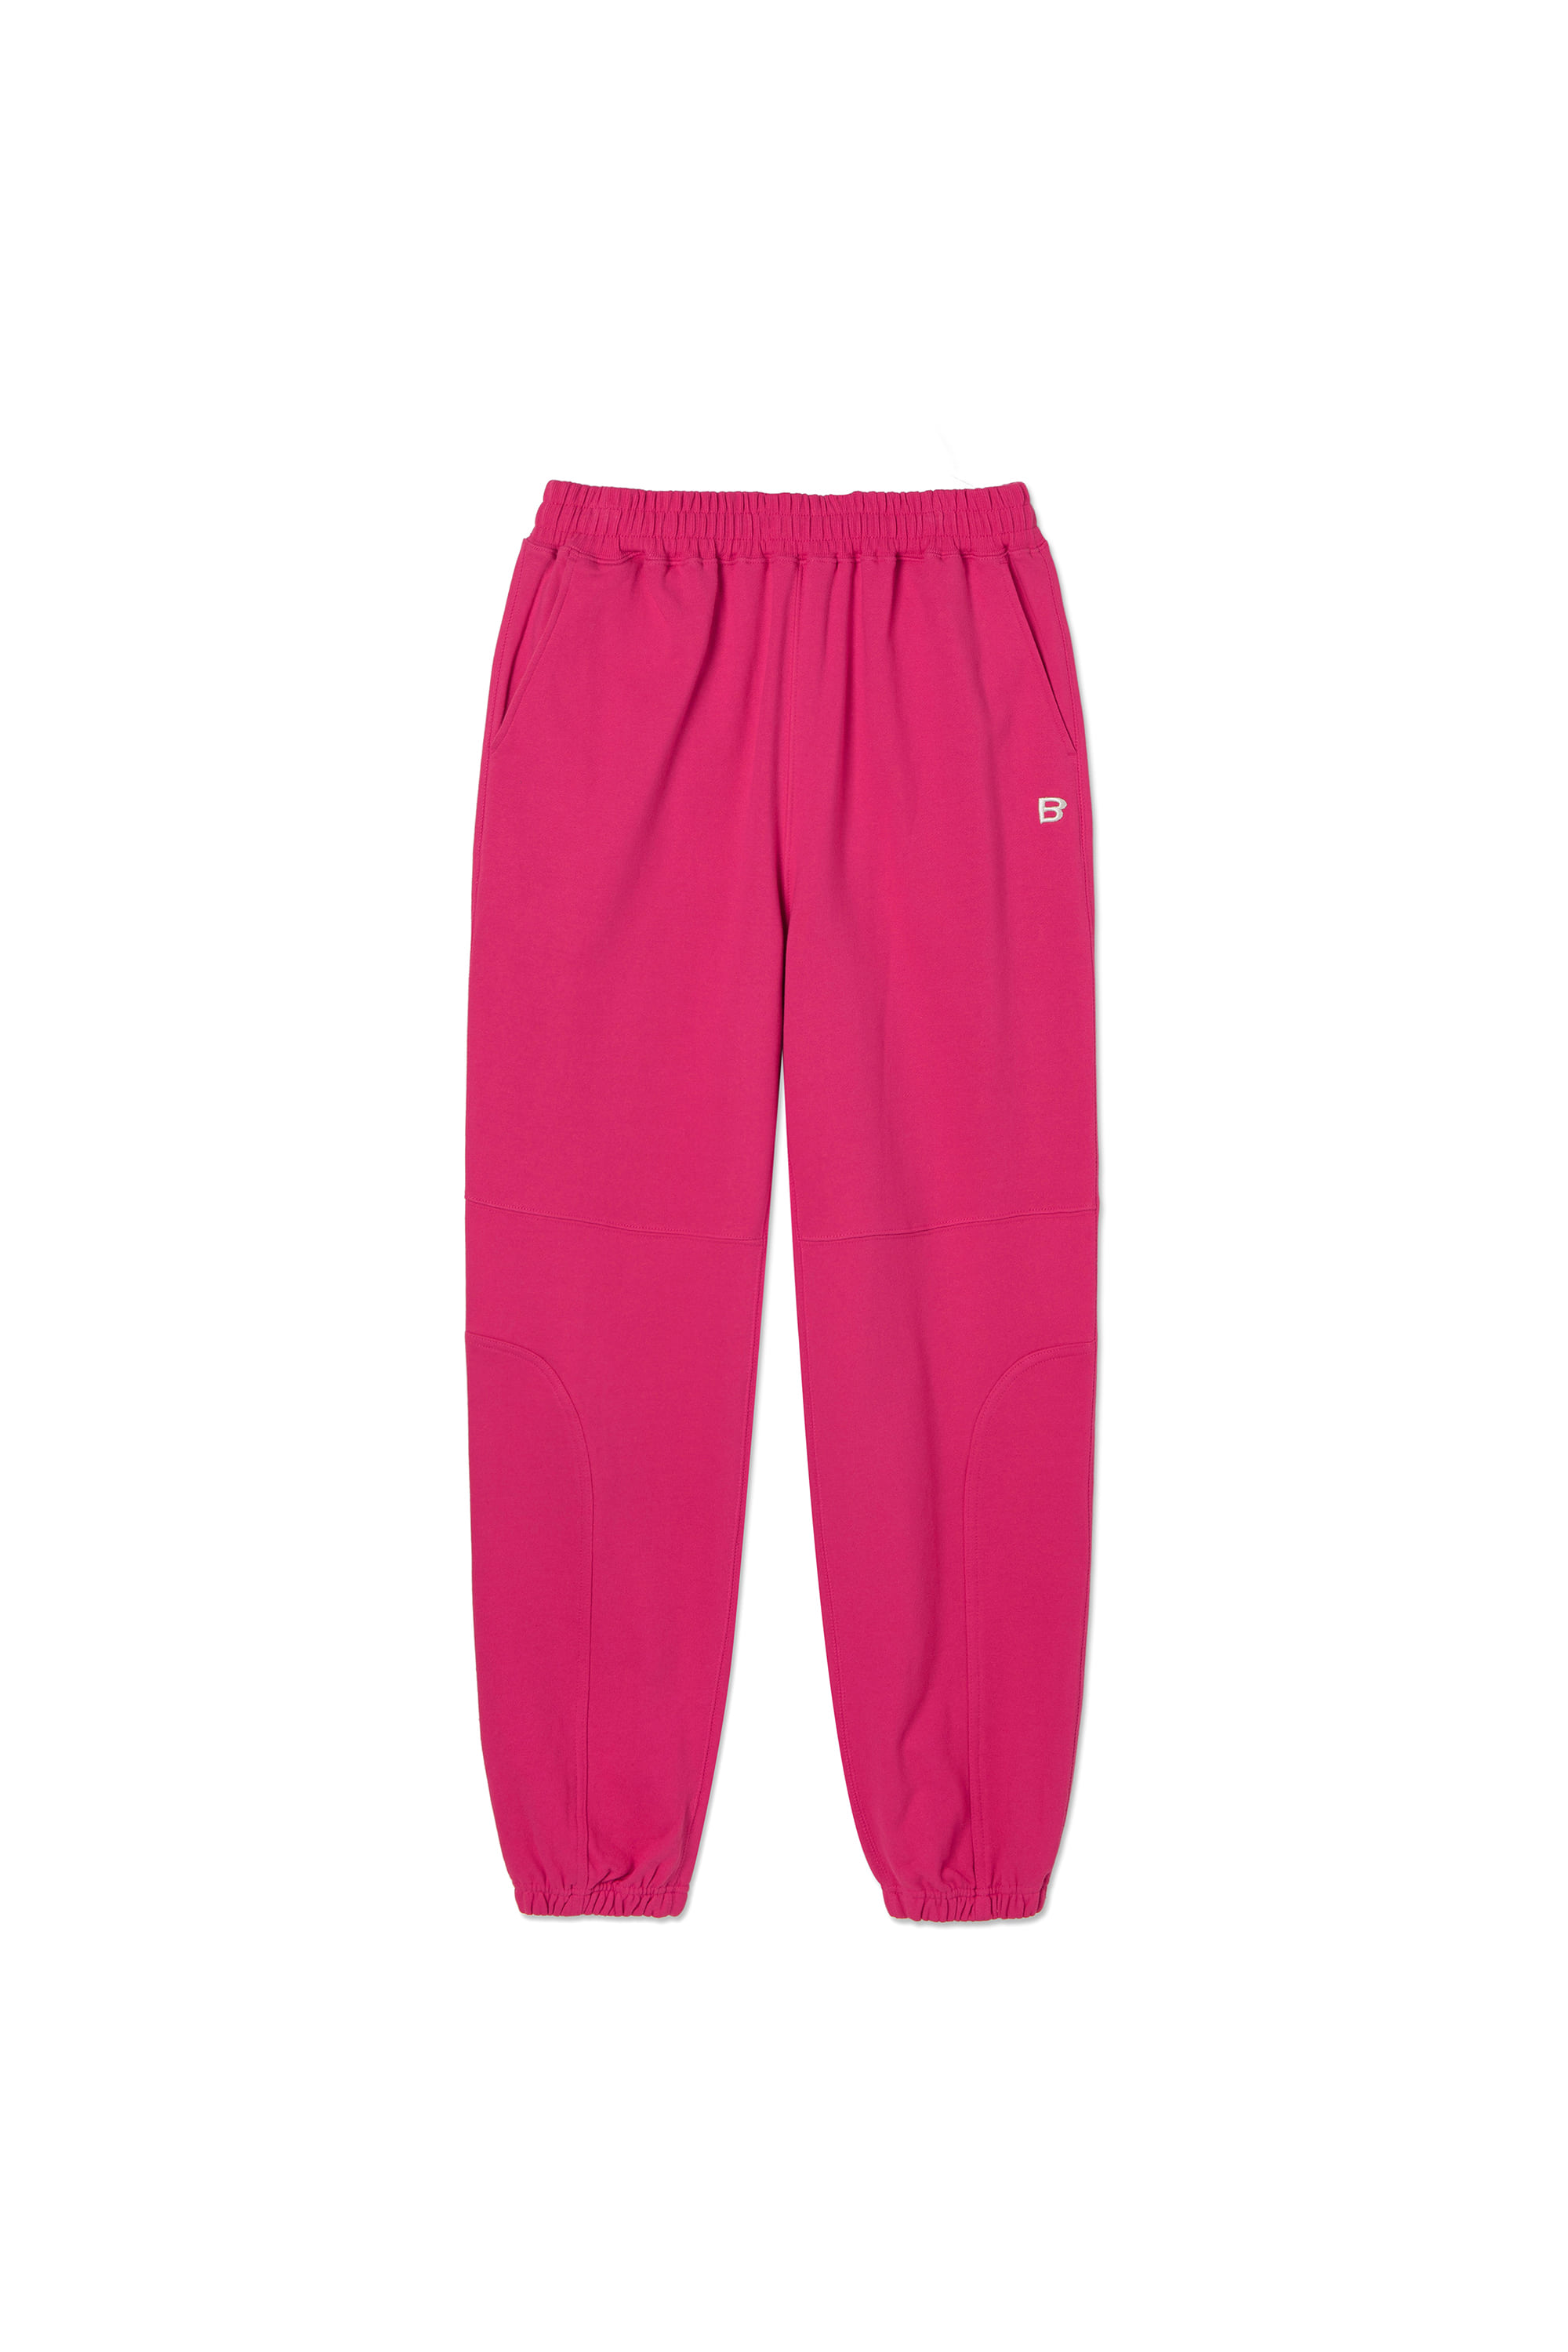 STRUCTURE SWEAT PANTS - PINK